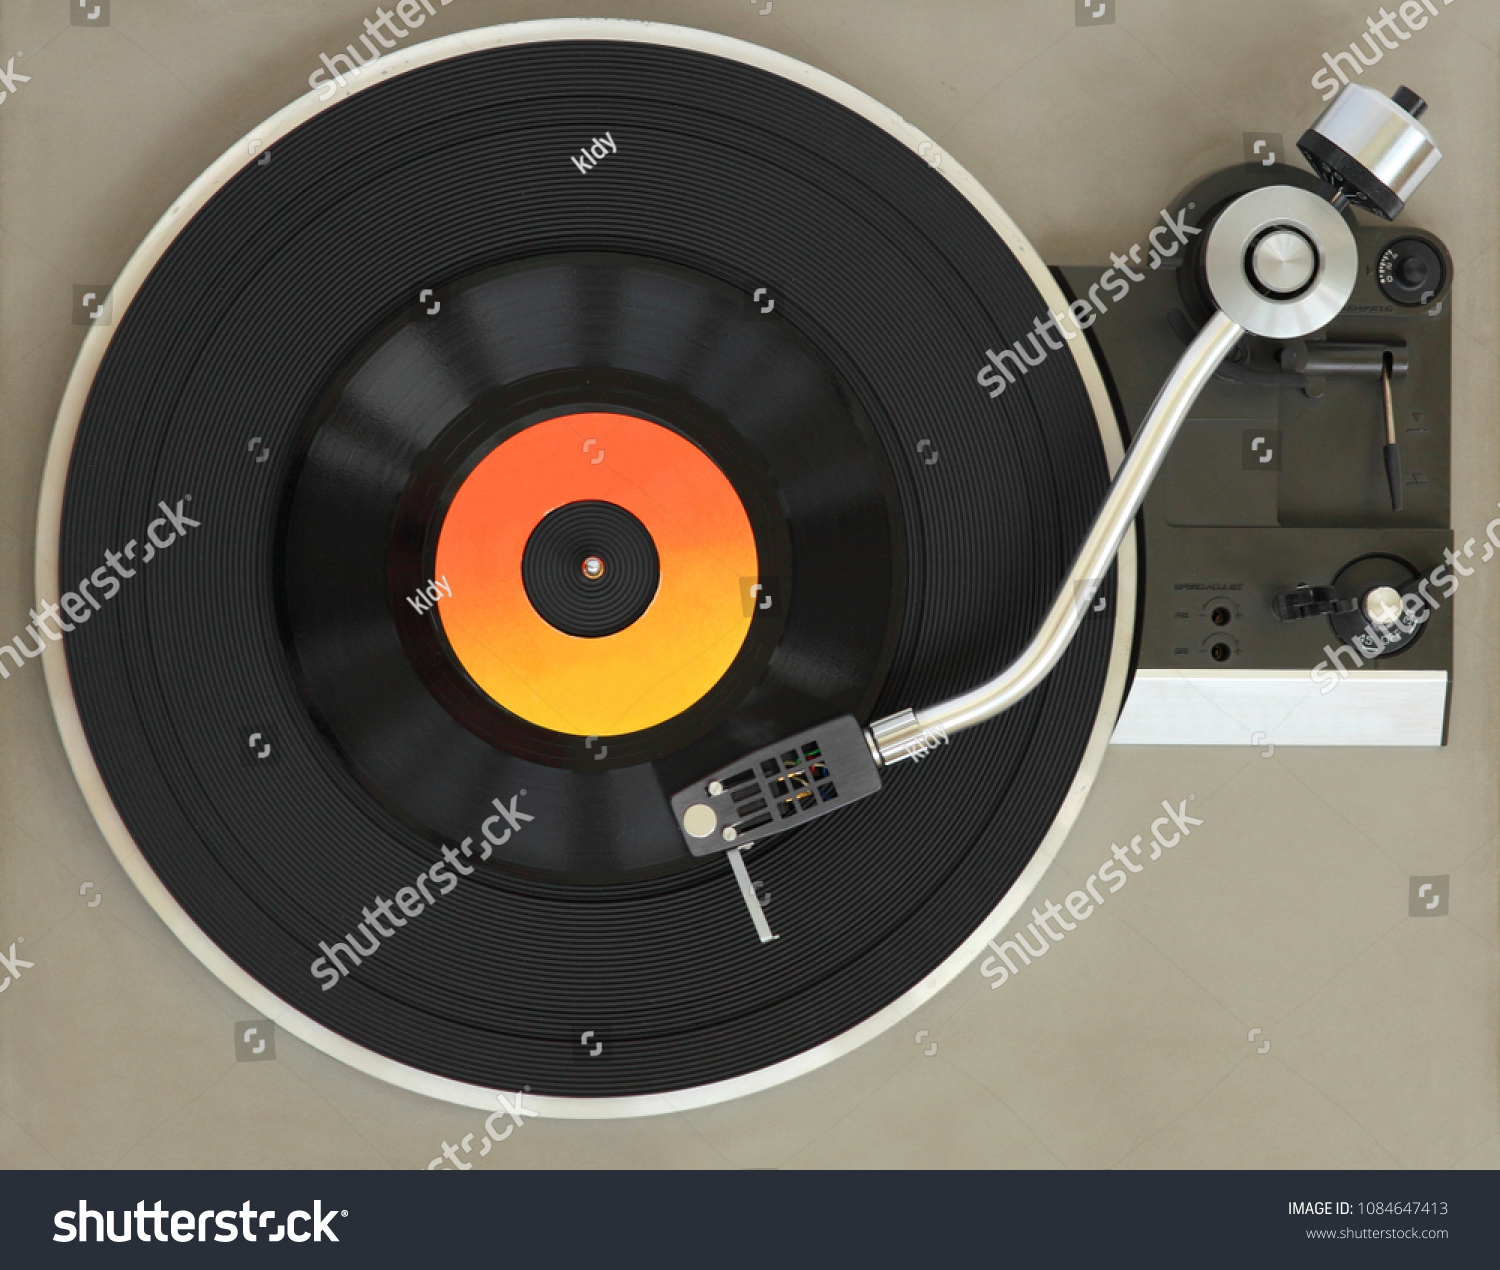 Vintage record player with vinyl record.  #1084647413